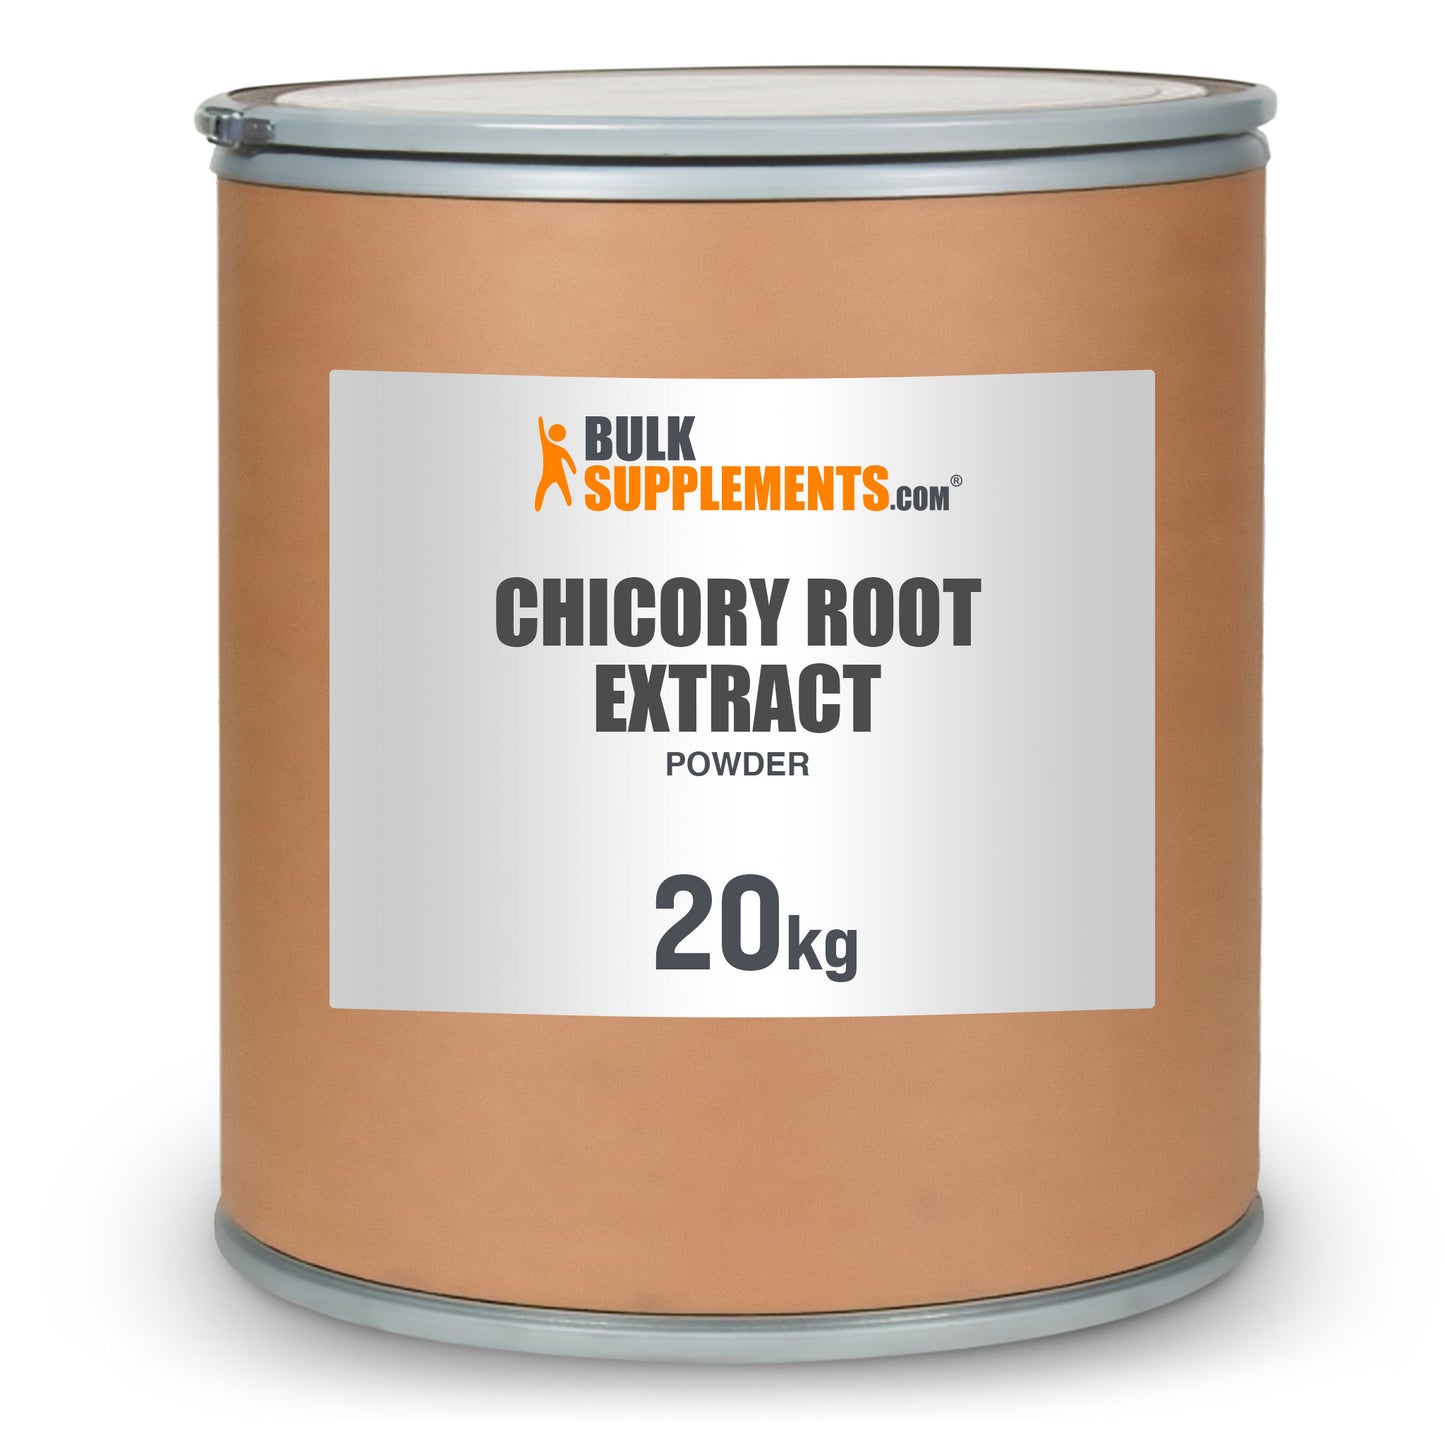 Chicory Root Extract powder 20kg barrel